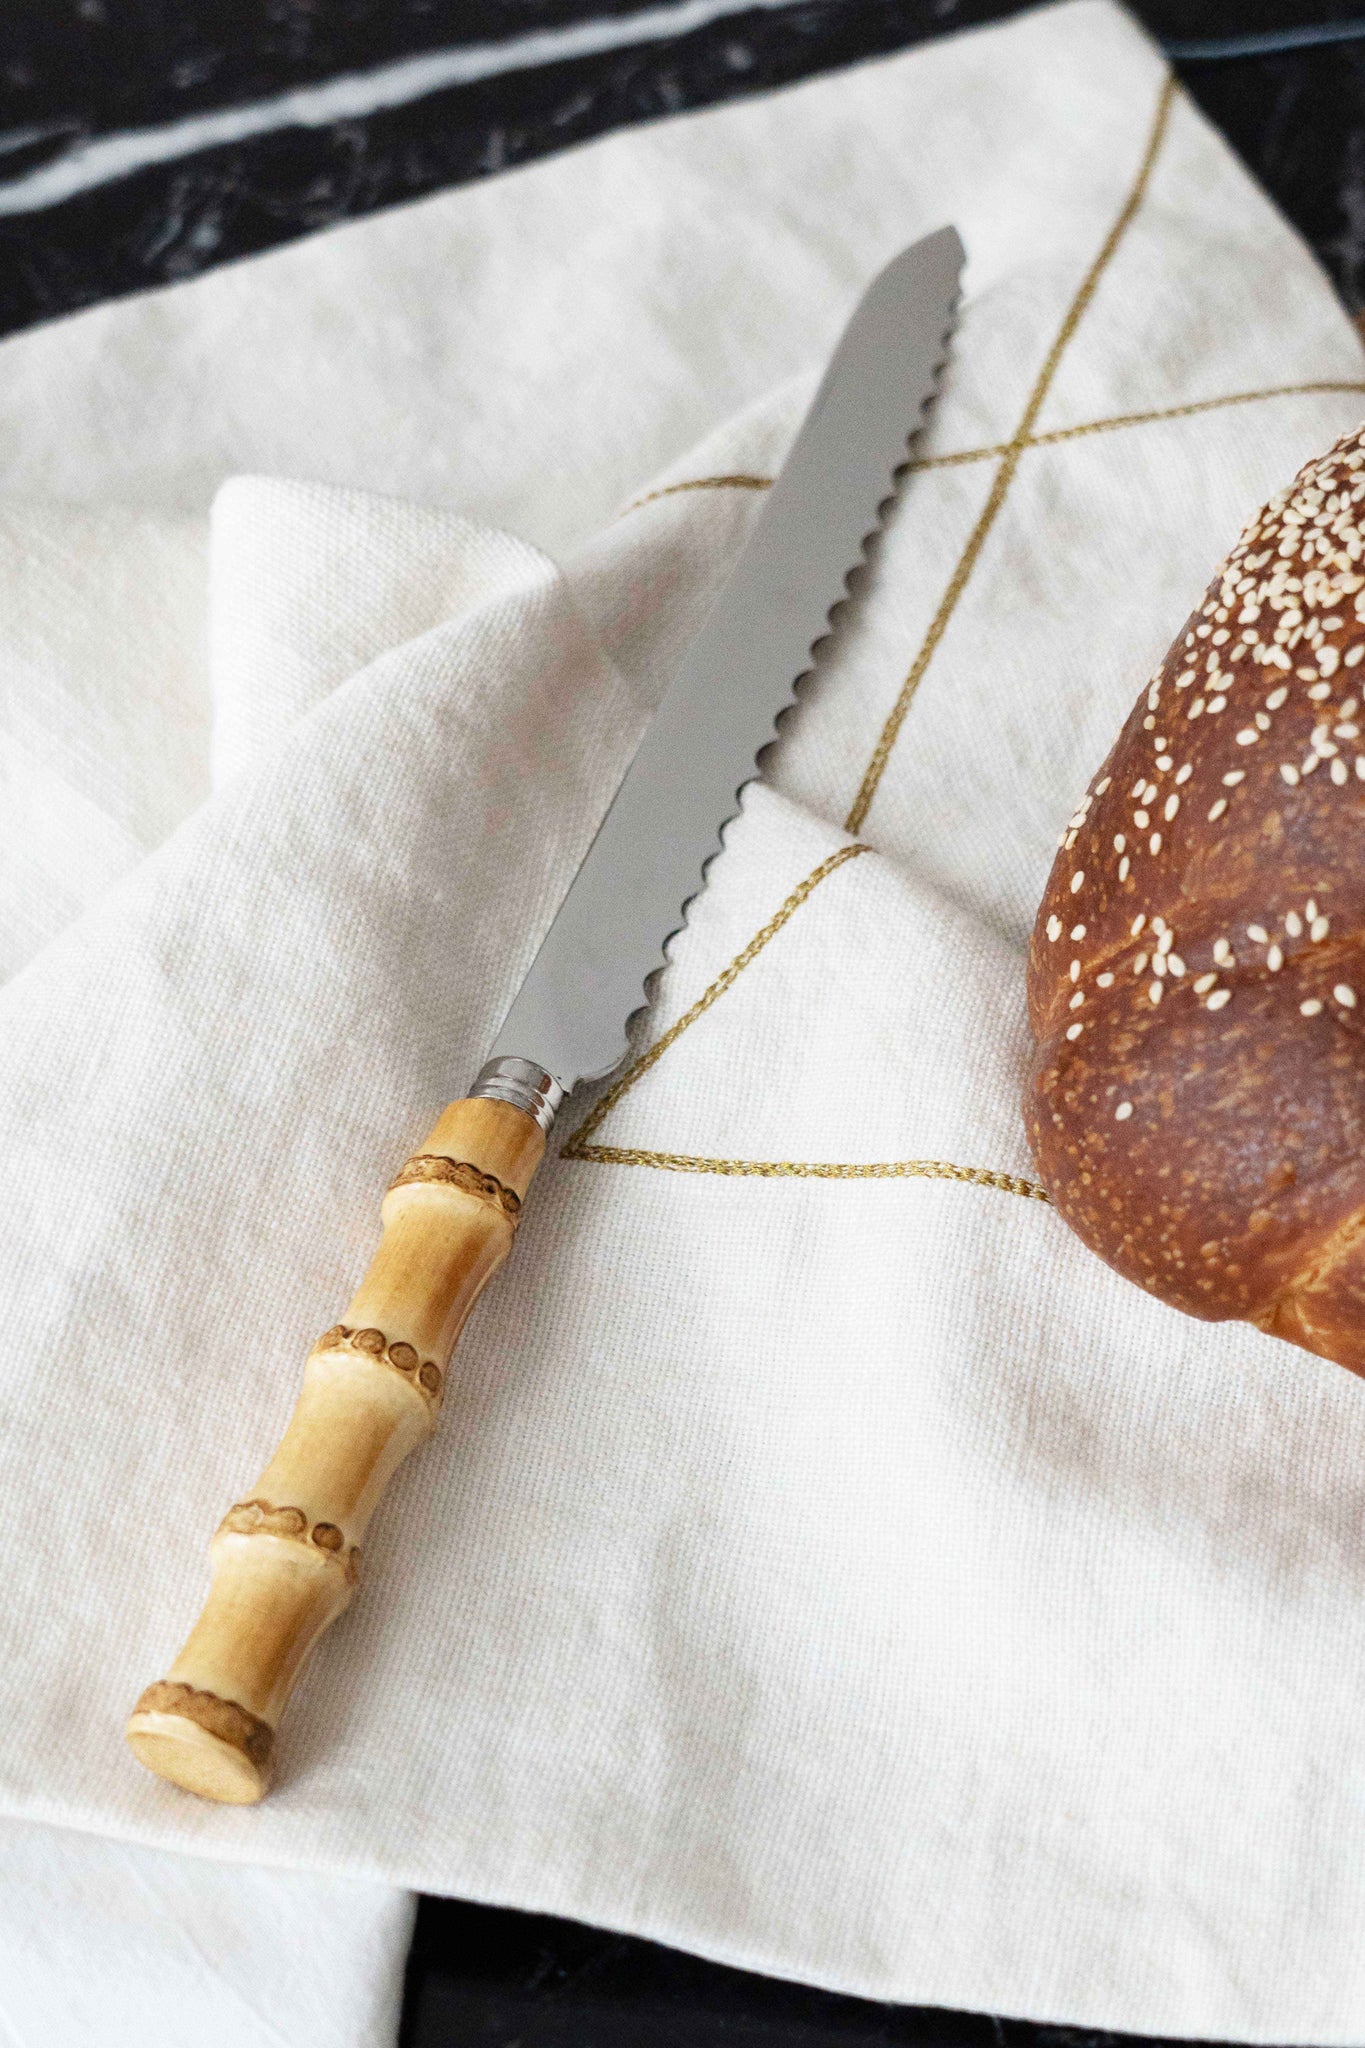 THE 'ALL THAT' SABRE BAMBOO CHALLAH KNIFE